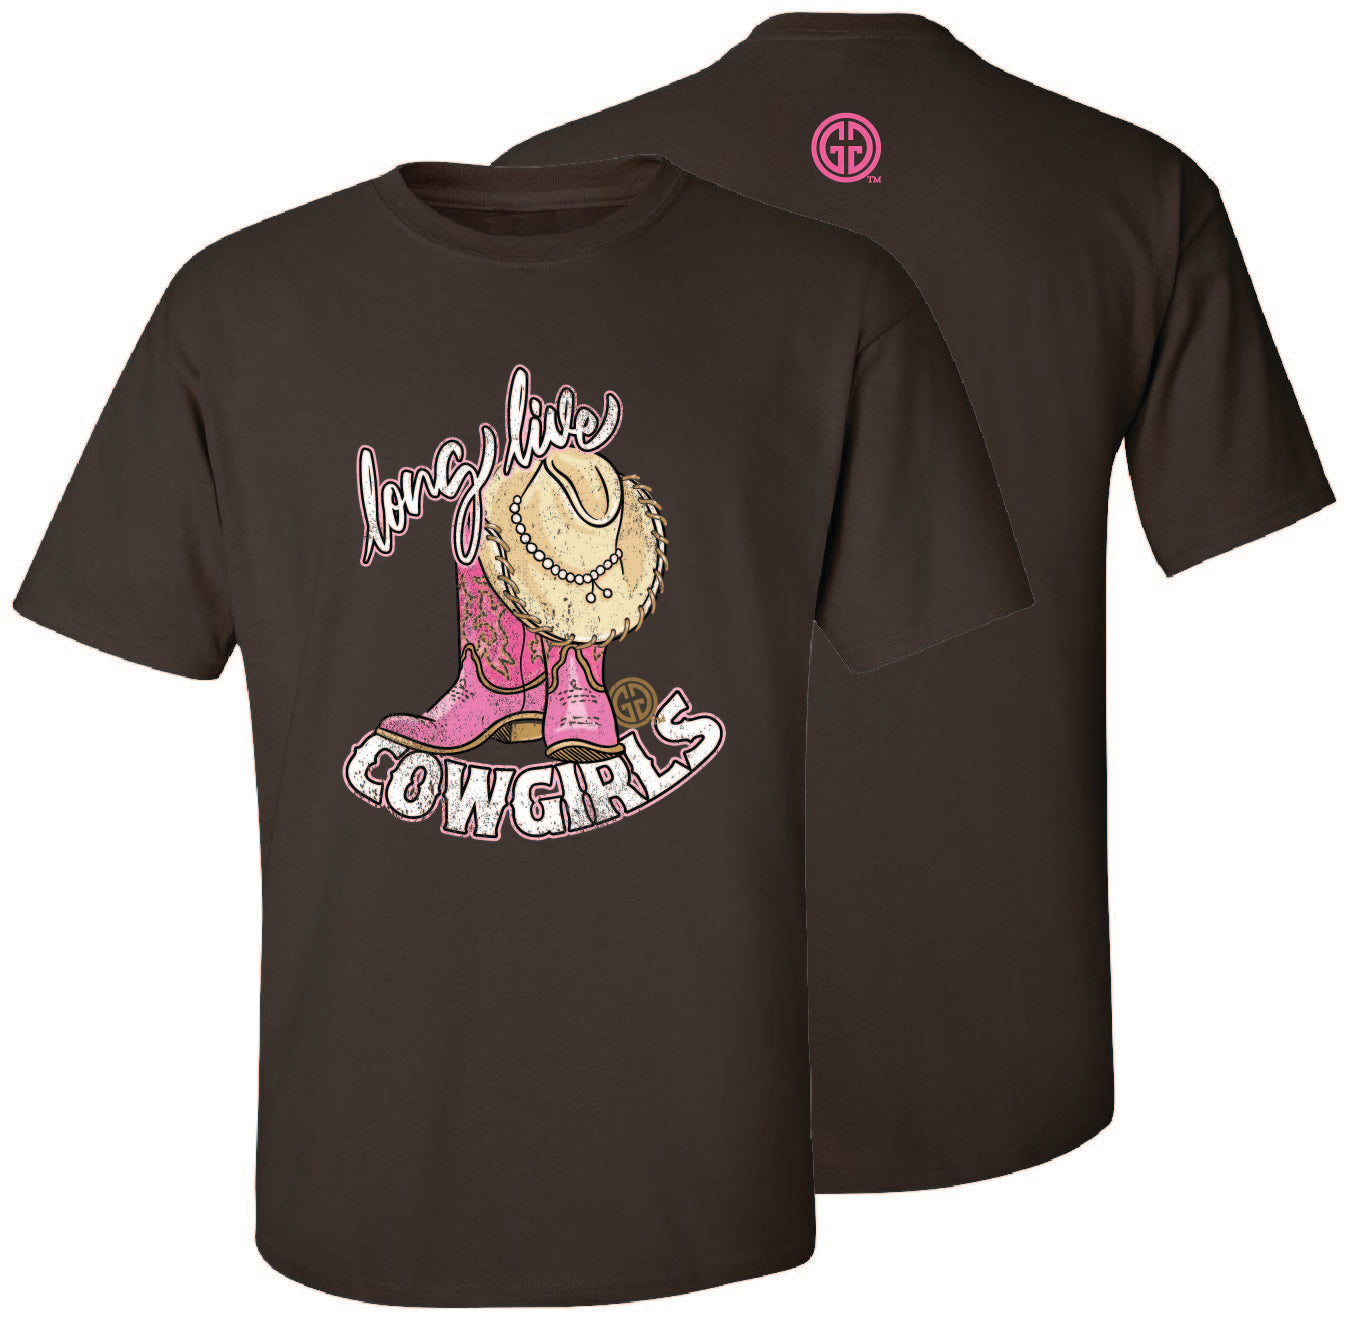 2616 Long Live Cowgirls-SS Chocolate